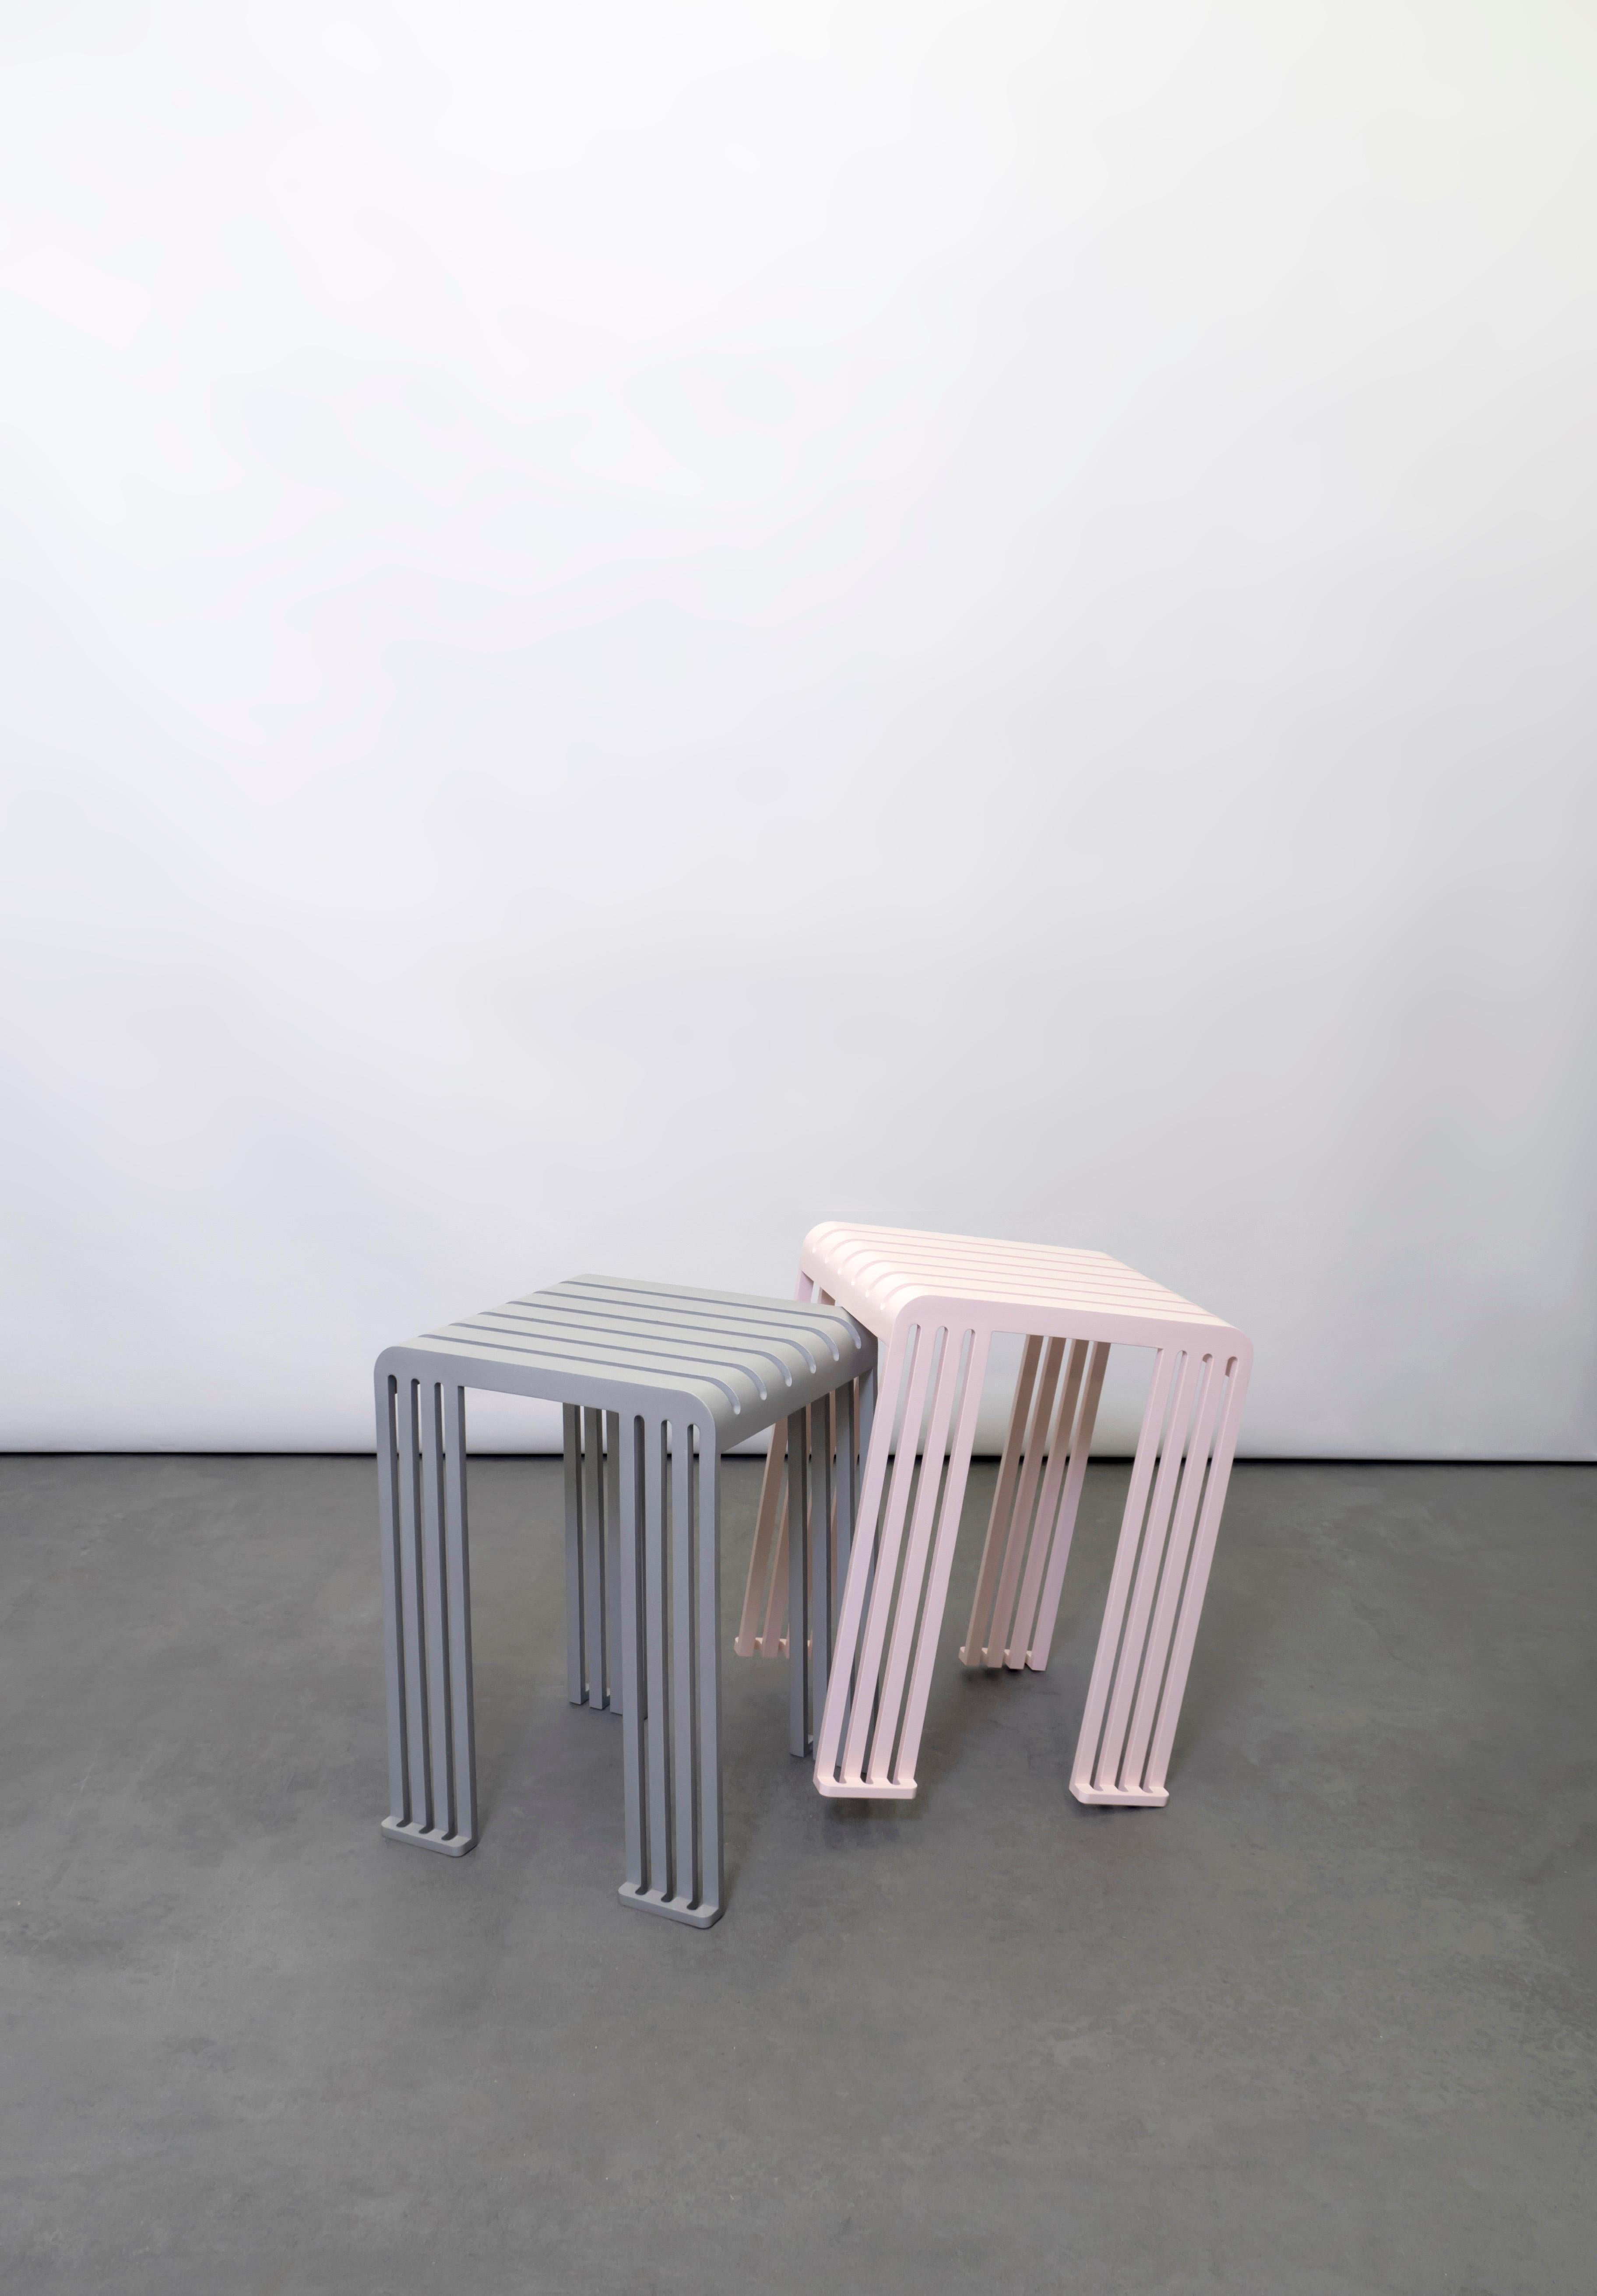 Set of 2 aluminium Tootoo stools by Helder Barbosa
Materials: Aluminium
Dimensions: 34 x 29 x 45 cm
Indoor or outdoor

Trained as a craftsman (école Boulle, 2014), Helder Barbosa is a designer who lives and works in Paris.
Attracted by